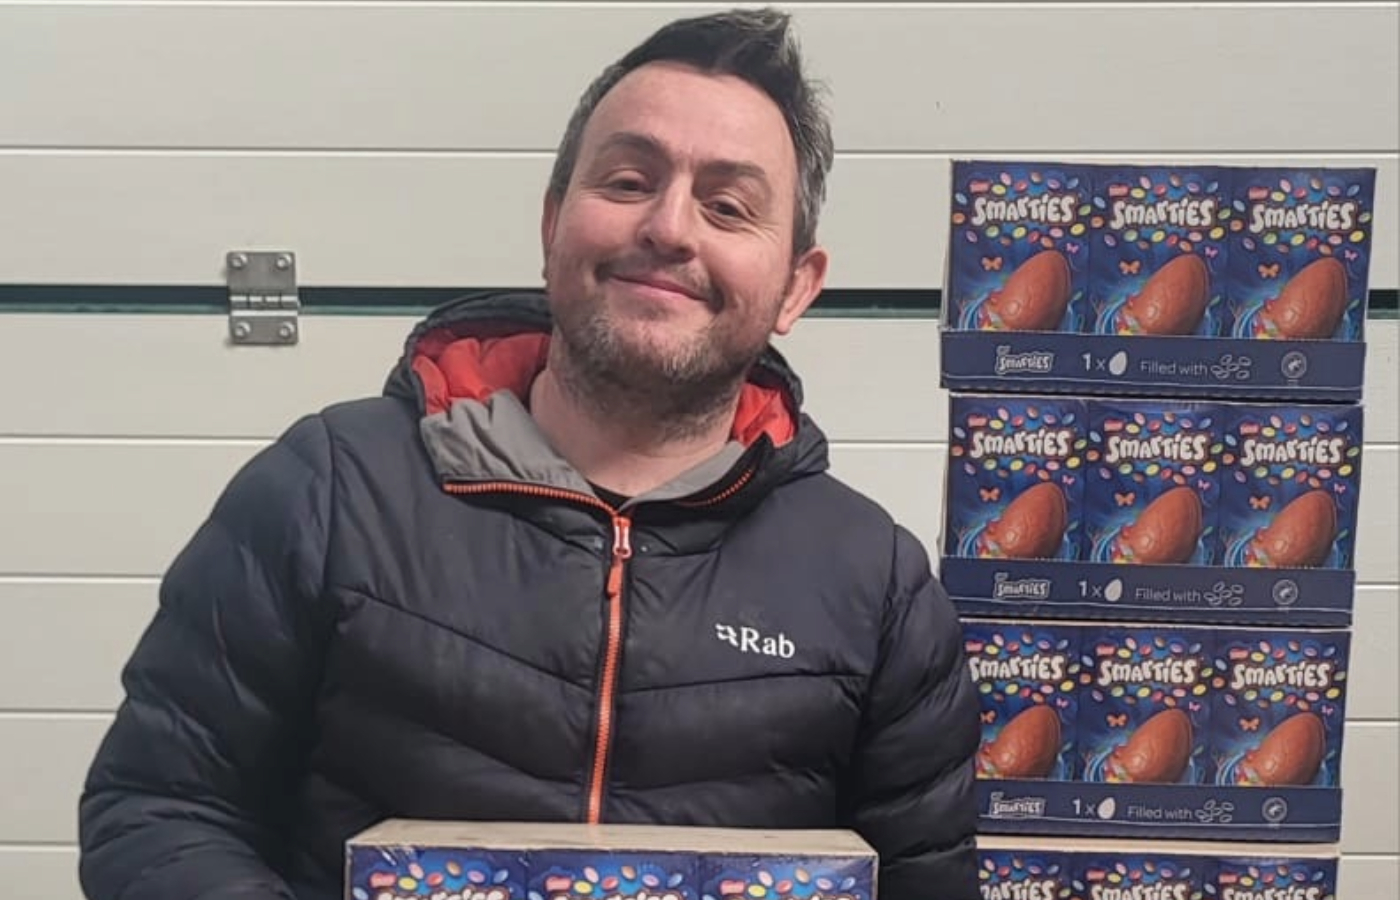 Mr Dafydd decided to raffle off 100 of the chocolate treats to raise money for the local RNLI lifeboat branch.